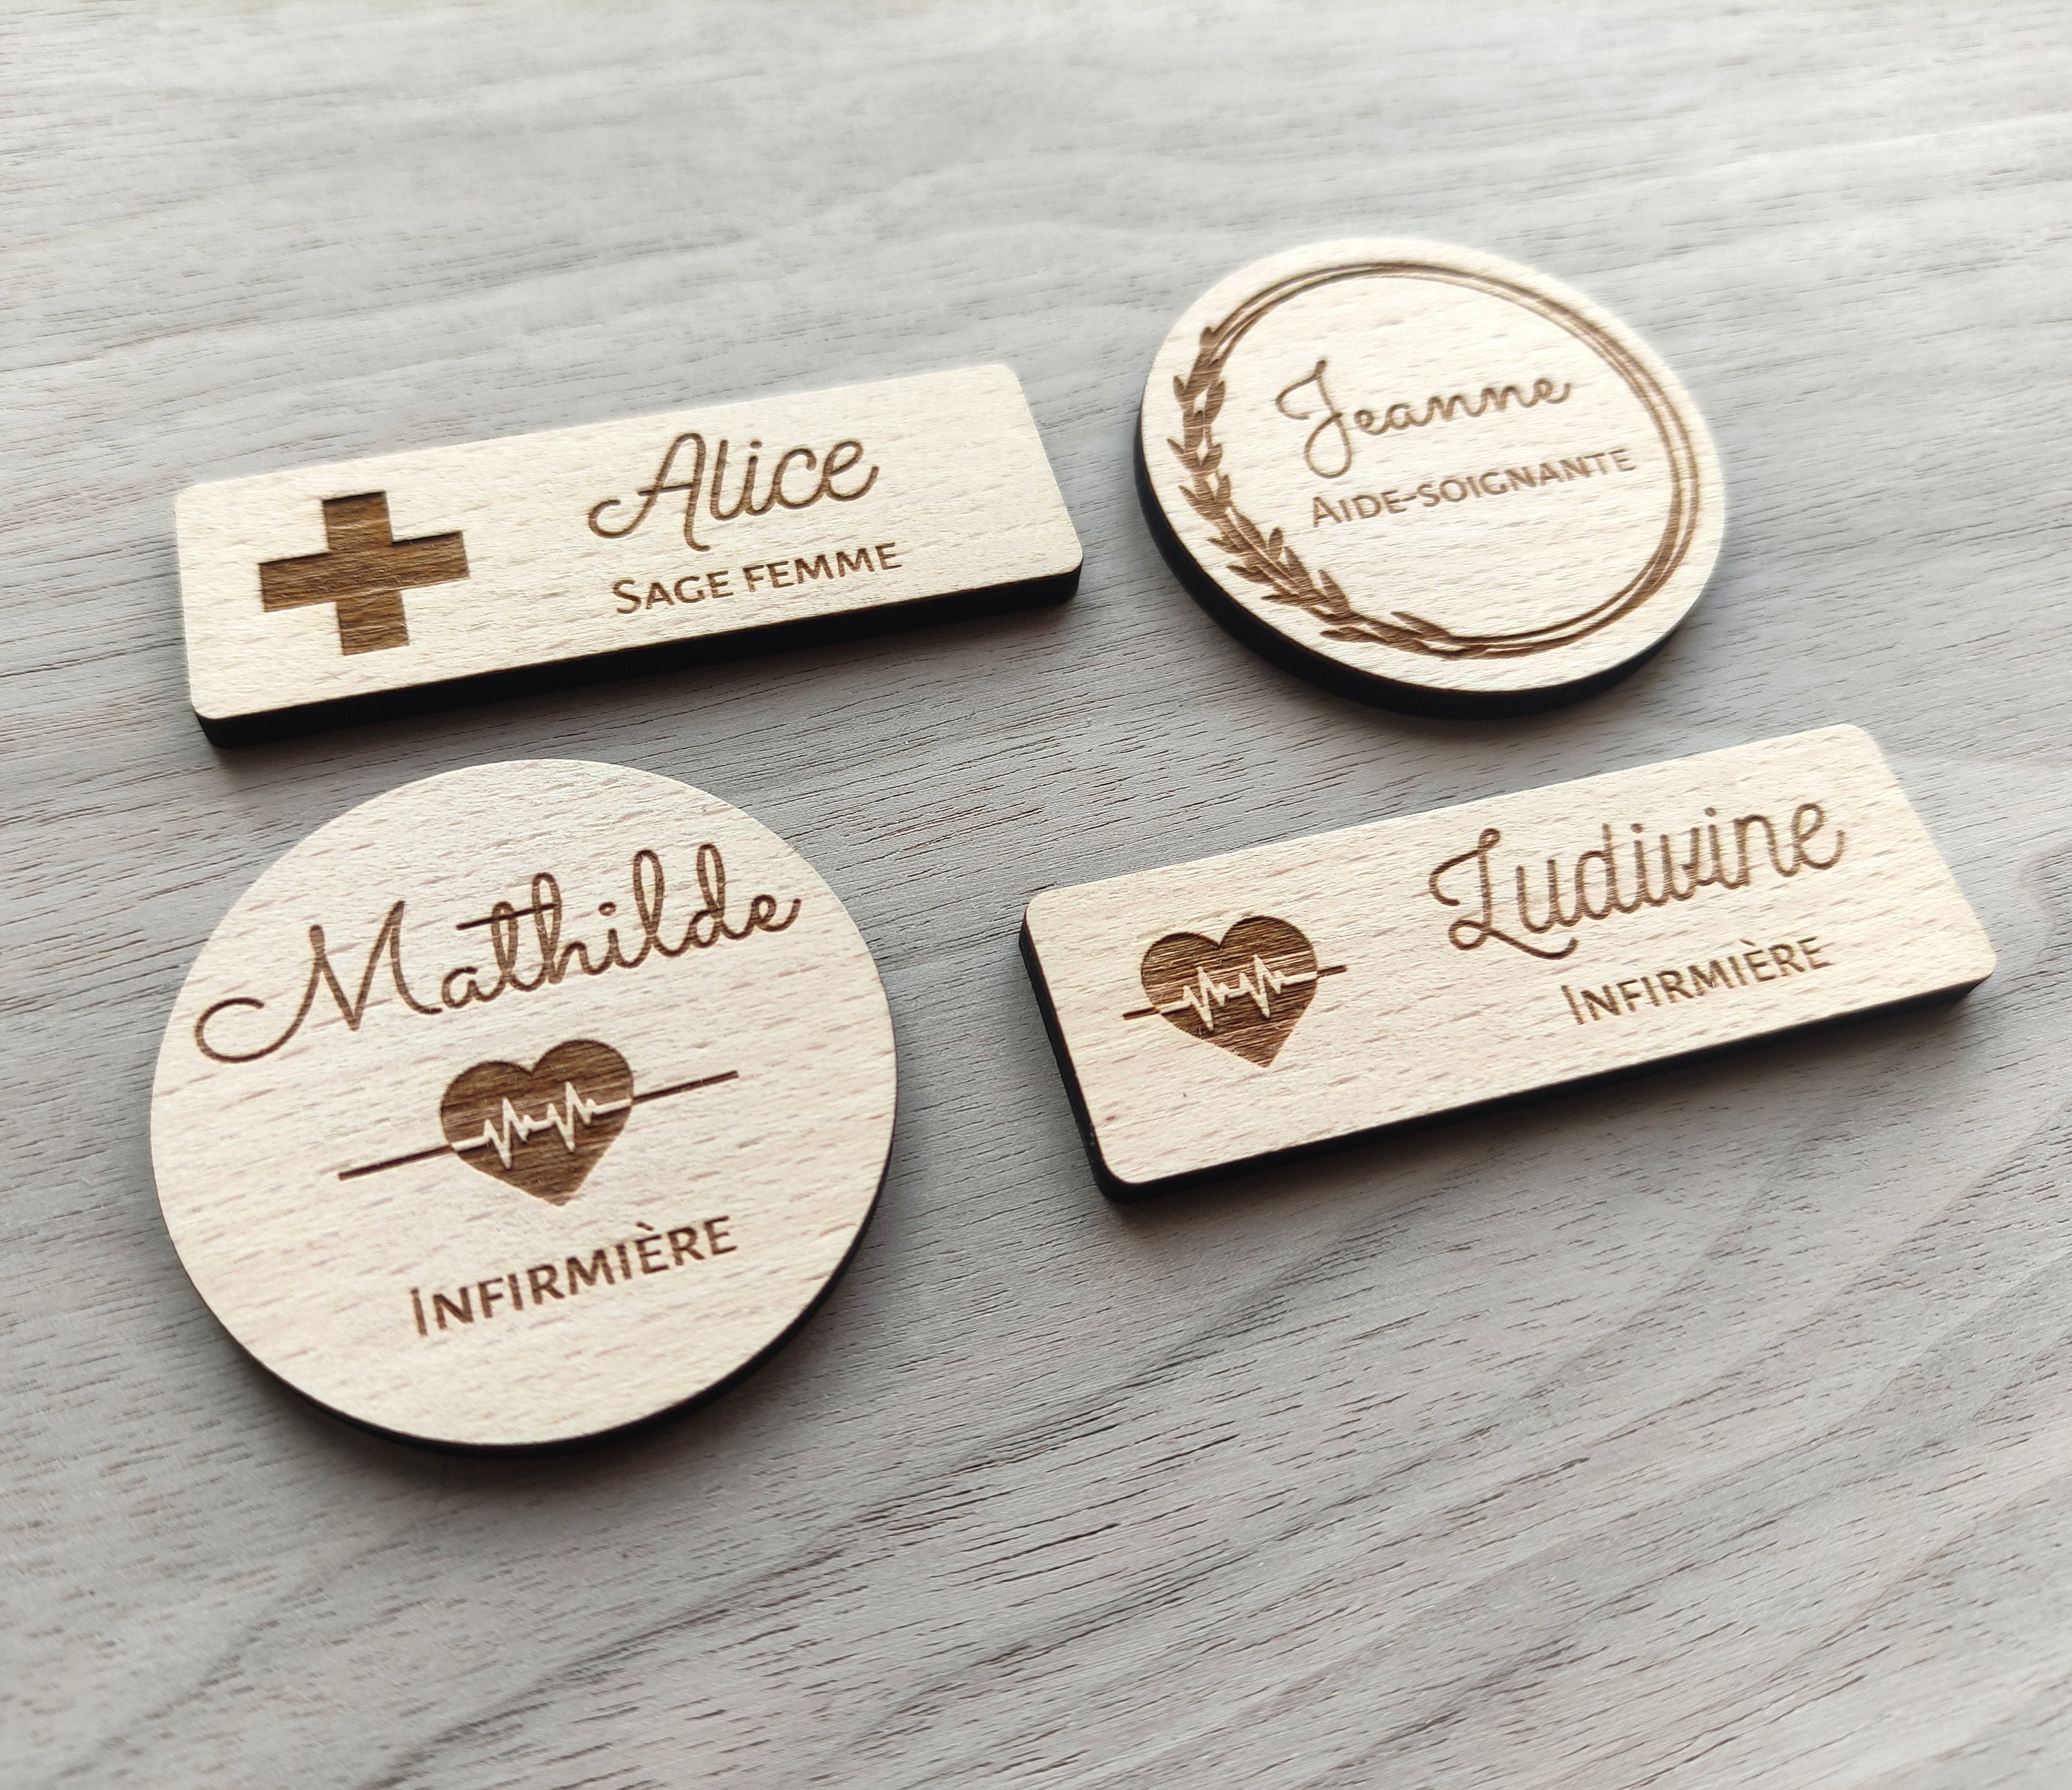 Wooden Badge Nurse Midwife Caregiver, Personalized Badge 